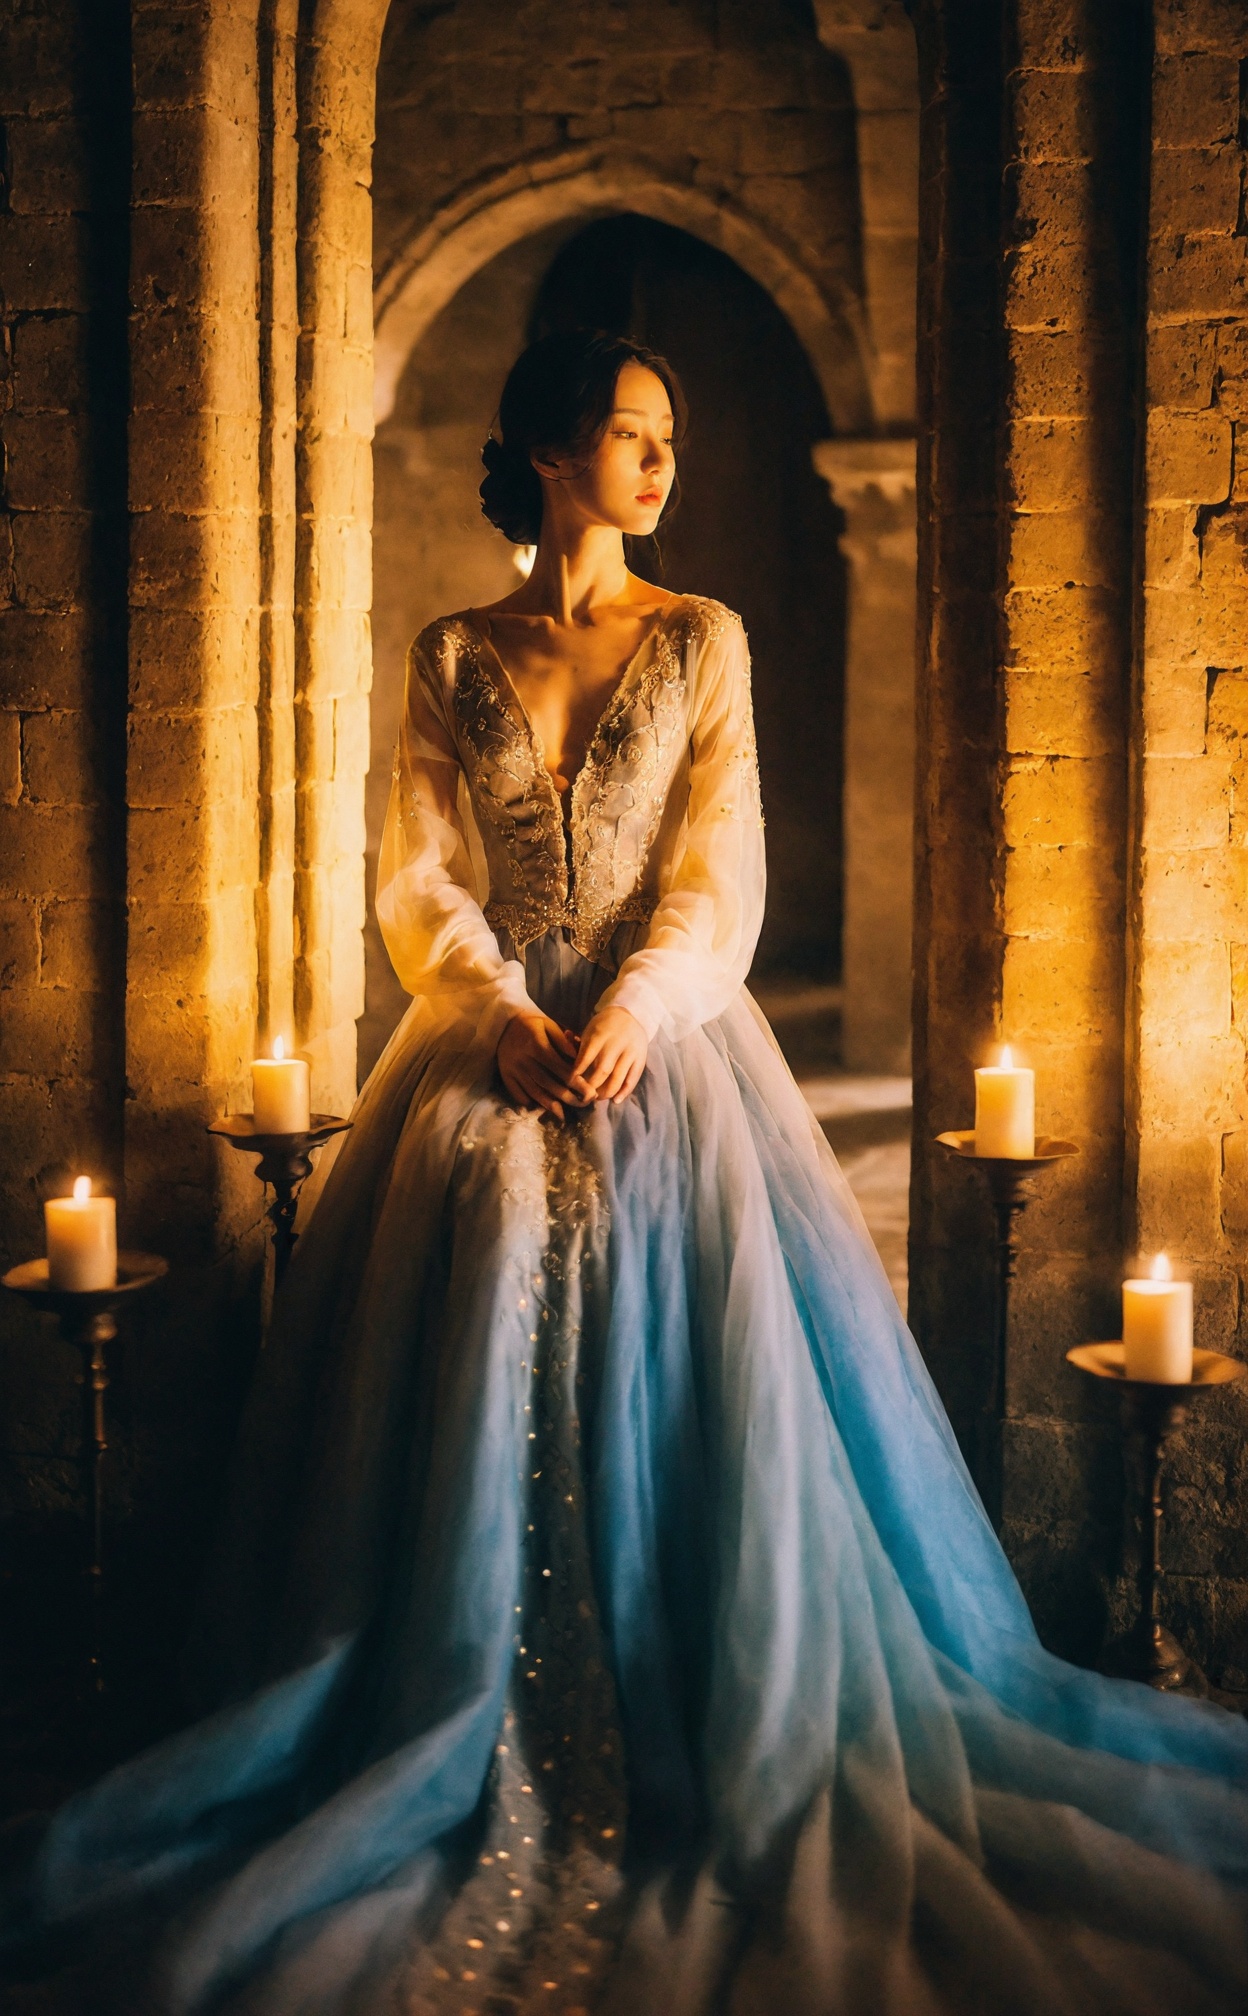 mugglelight, a woman in a flowing gown, surrounded by candles in a medieval castle, soft medieval glow, historical romance, regal elegance.korean girl,black hair,